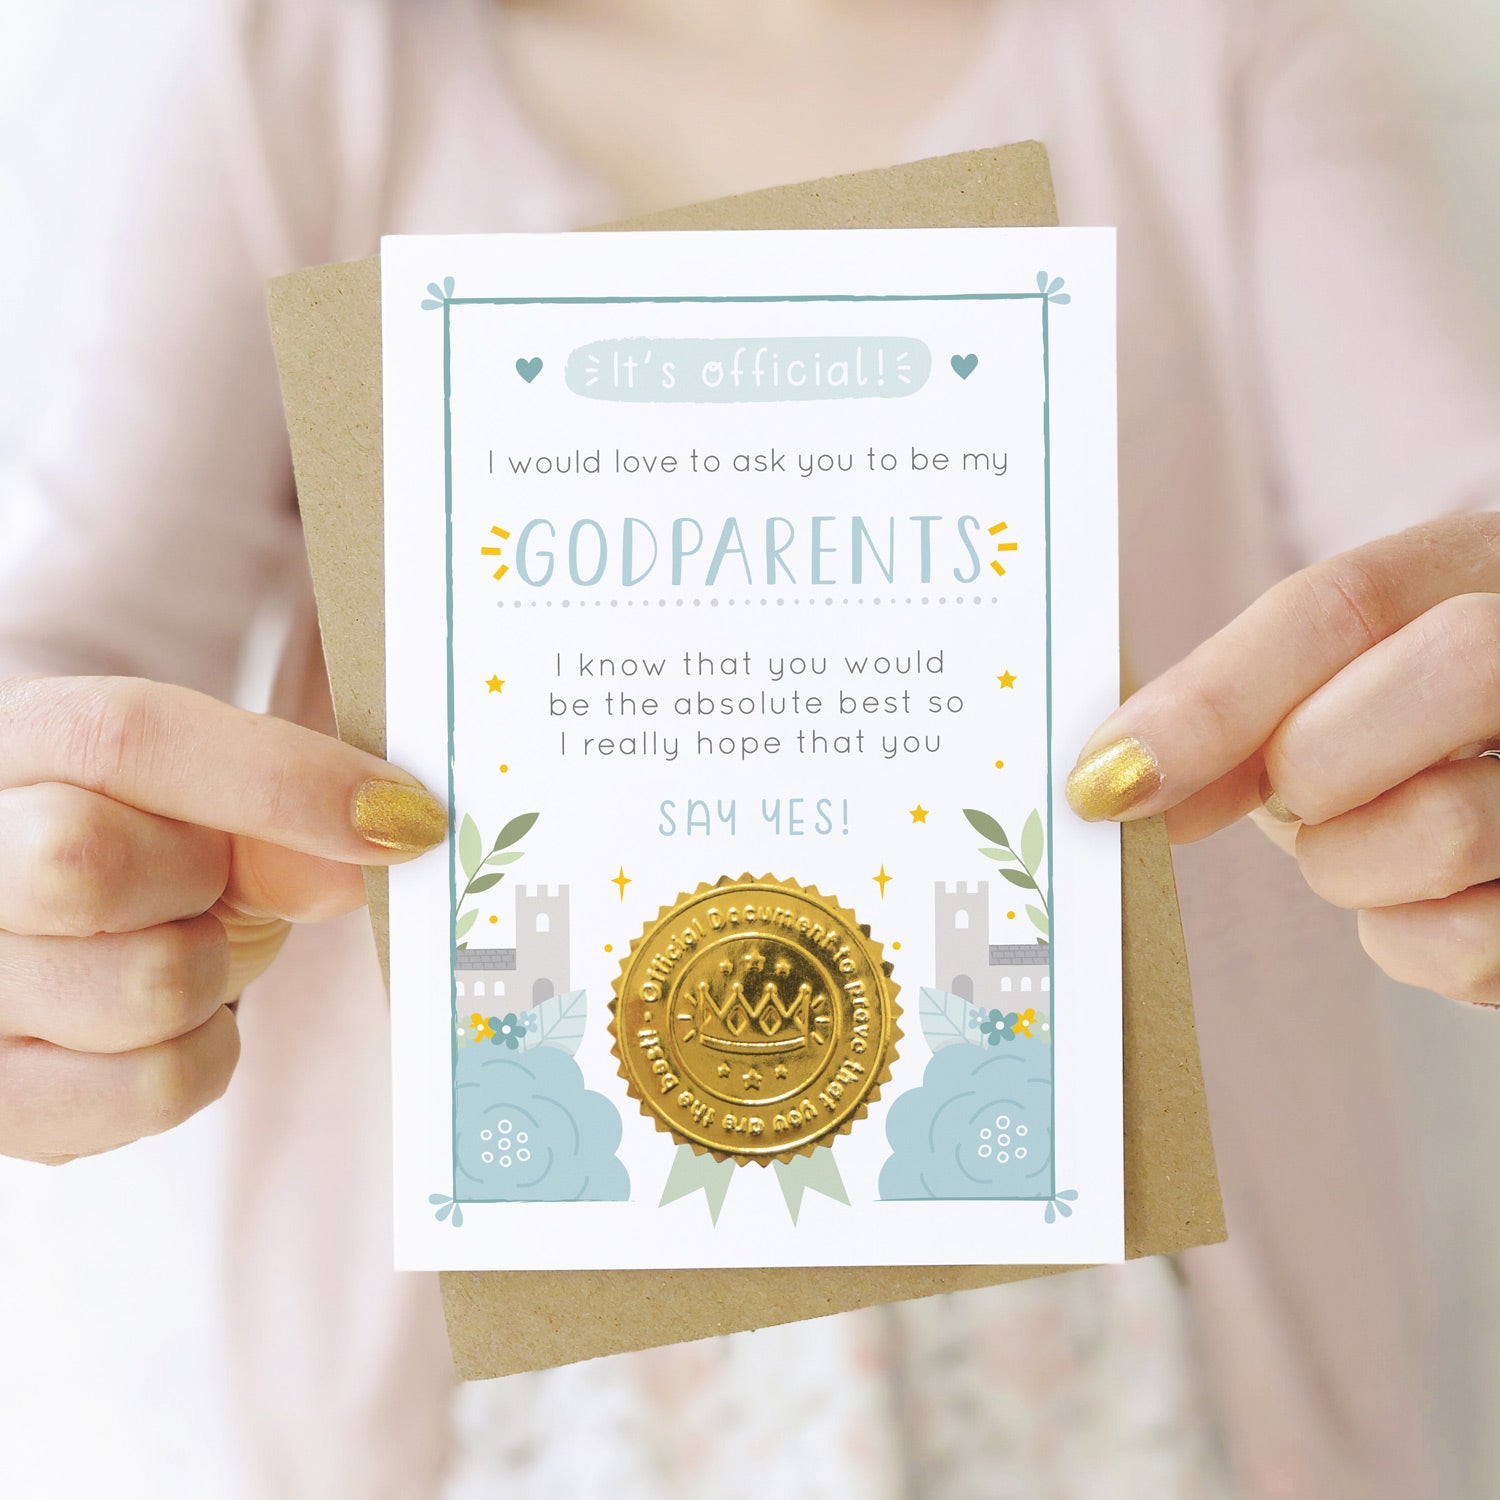 A will you be my godparents card in blue being held by both hands in front of a person wearing a pink cardigan and a white dress.